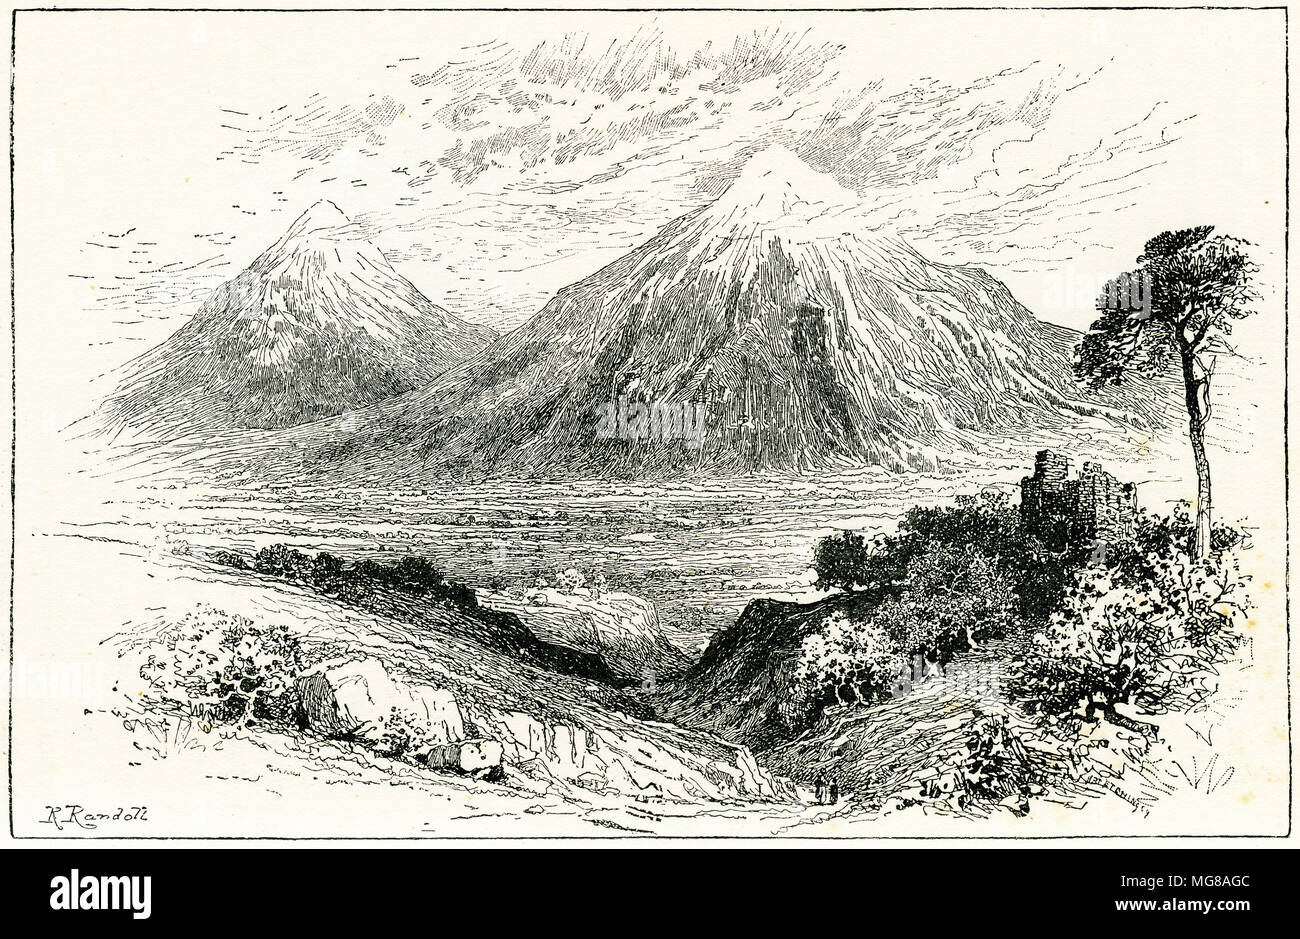 Engraving of Mount Ararat, landing place of Noah's Ark. From an original engraving in the 1895 edition of Graven in the Rock, by Samuel Kinns Stock Photo